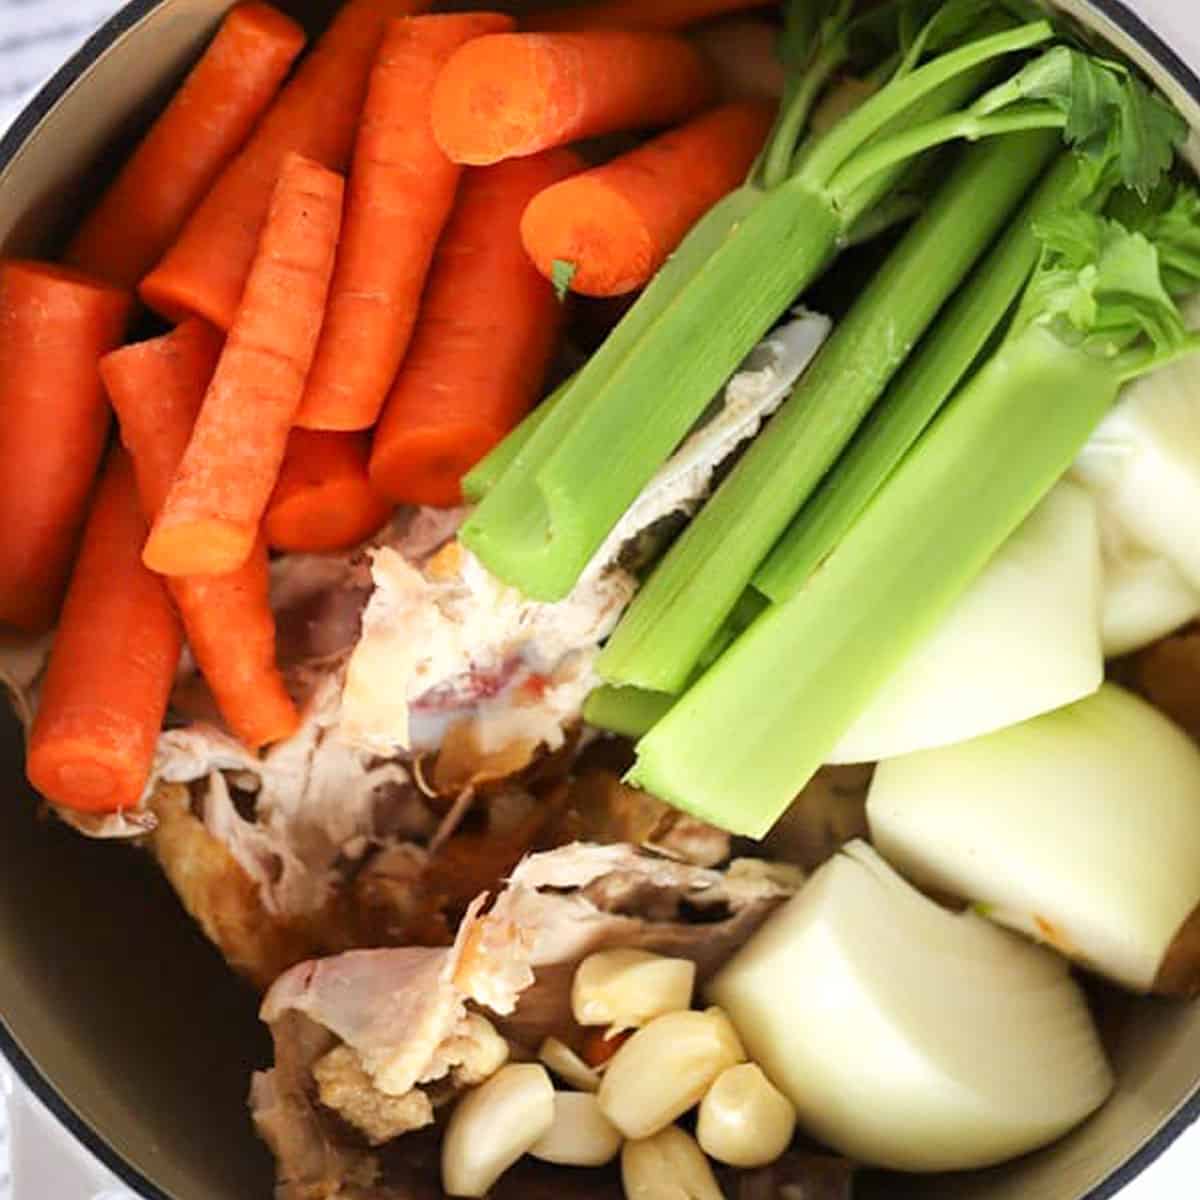 ngredients to make homemade chicken stock in a large pot.